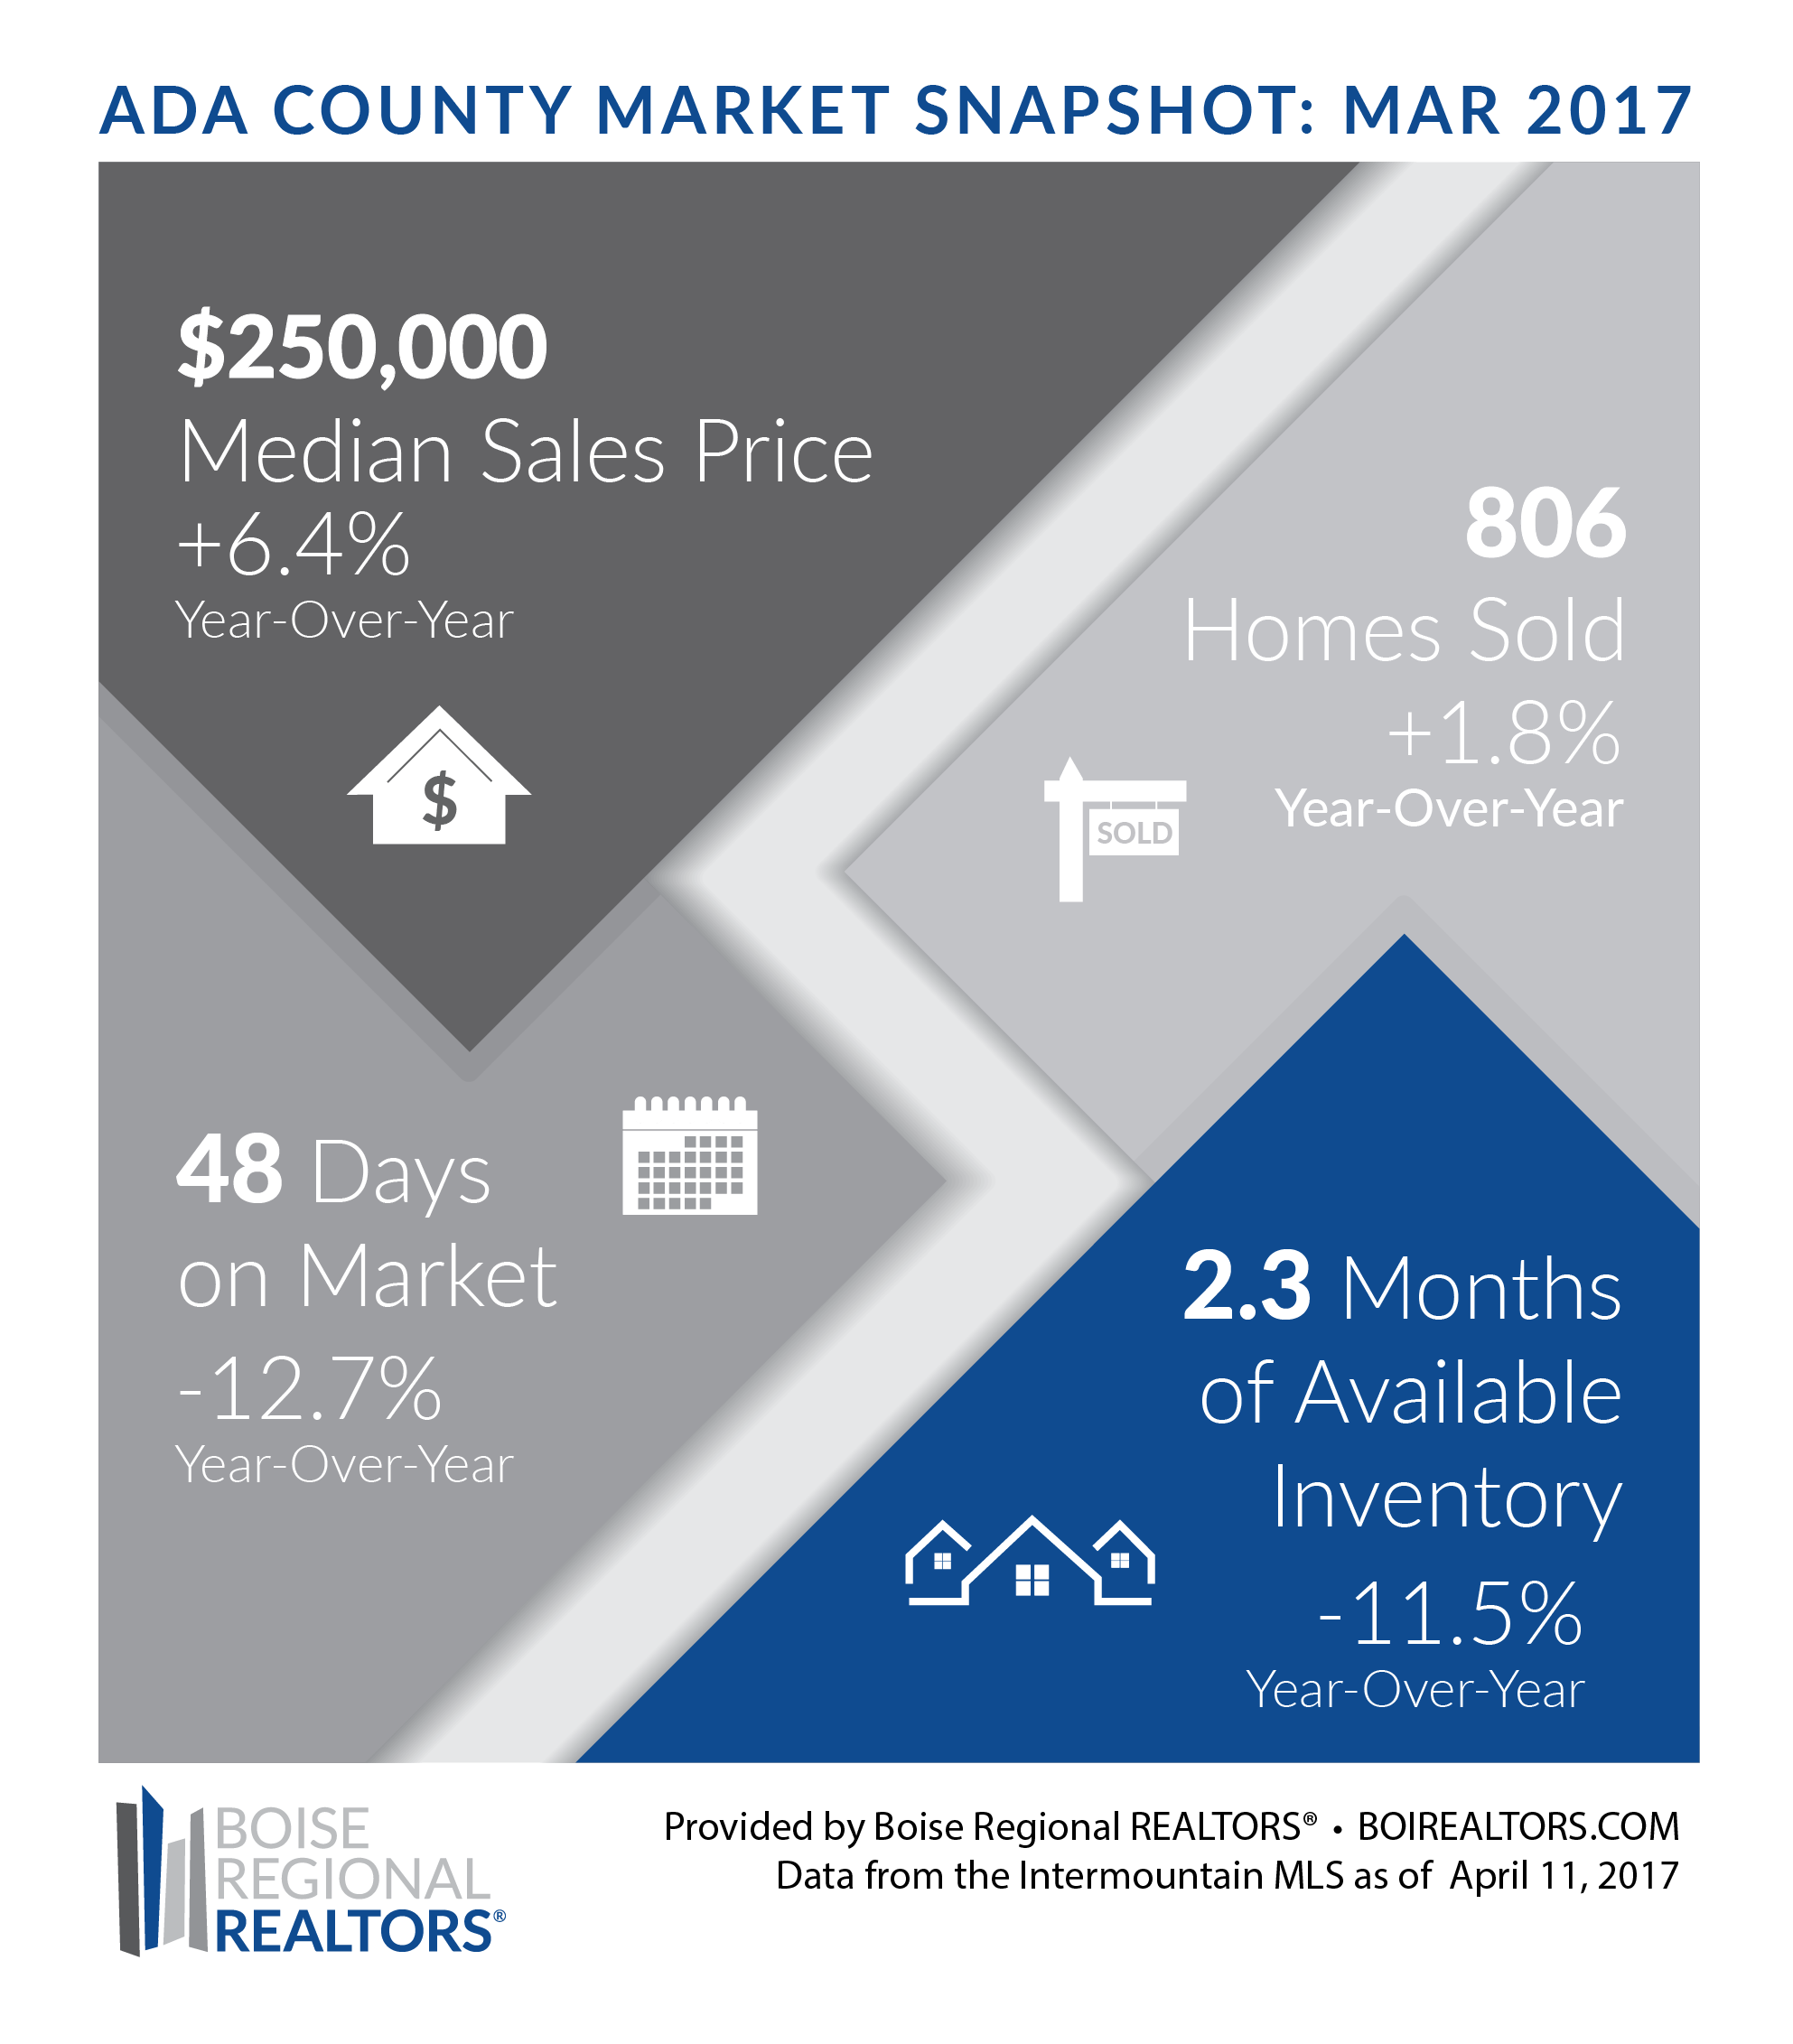 LOW INVENTORY OF EXISTING HOMES CONTINUES TO DRIVE PRICES